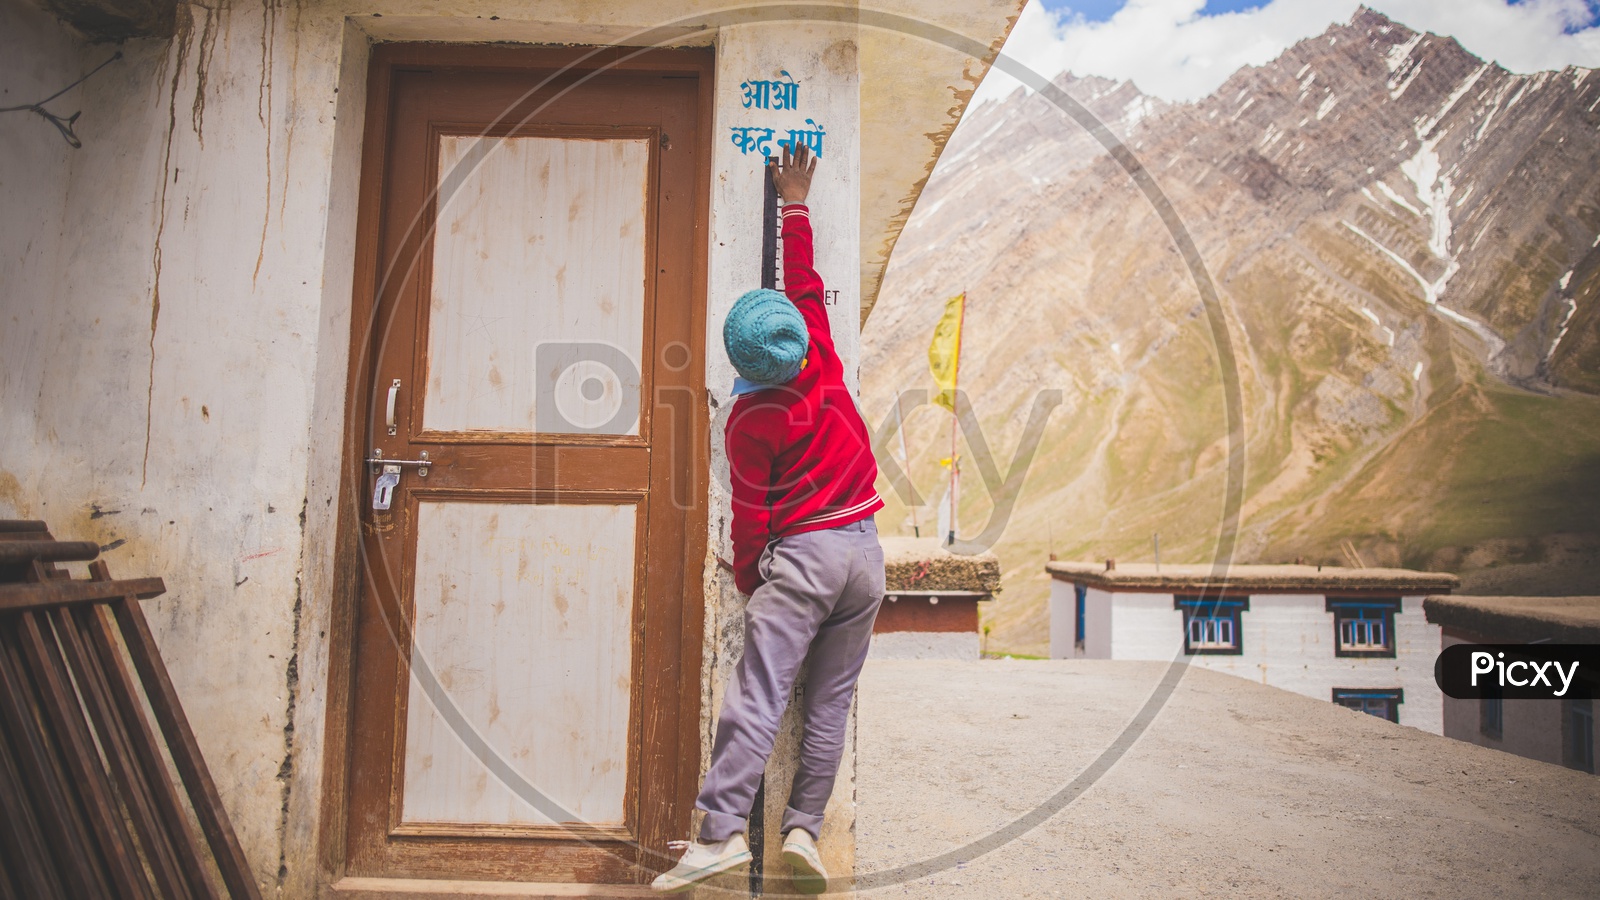 School Kids Or Children   Measuring Their Height at a Scale In The Villages Of  Spiti Valley